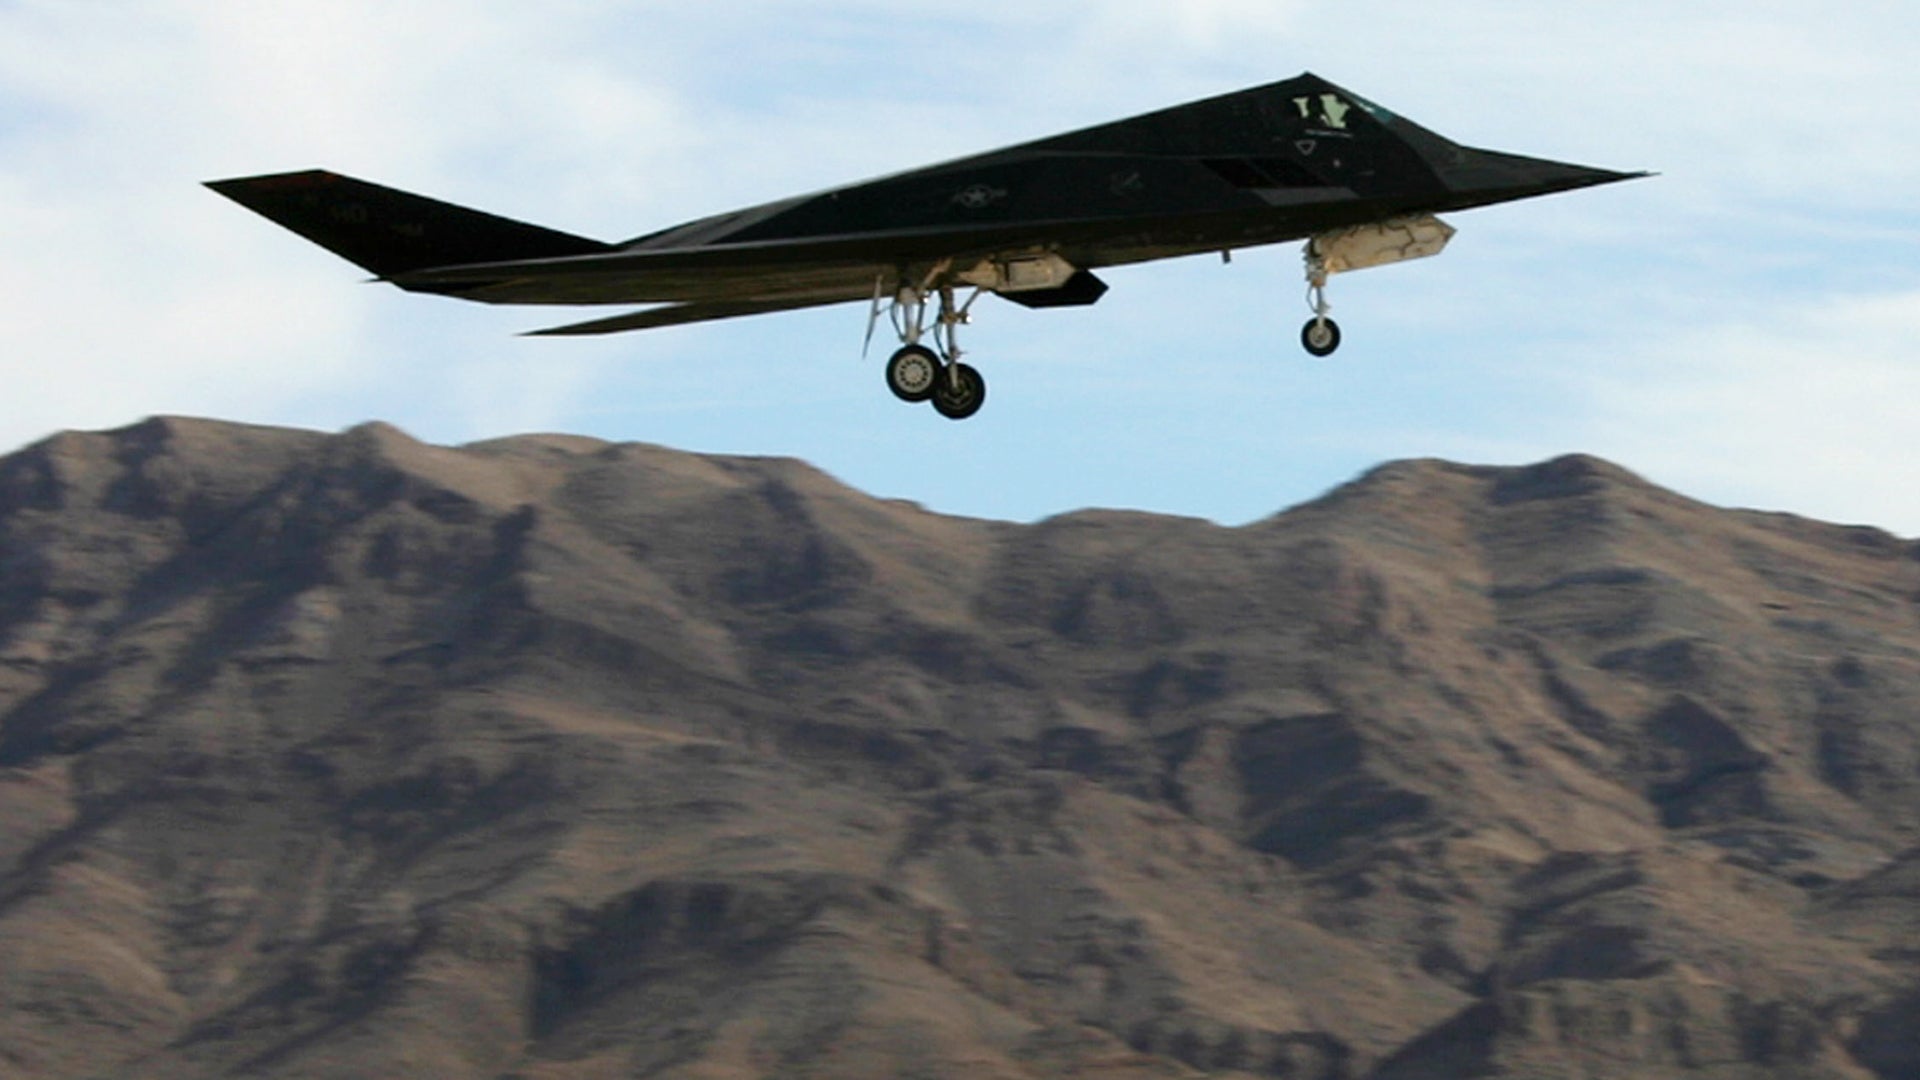 Listen To This Highly Interesting Radio Recording Of The F-117’s Latest Flight Over Nevada